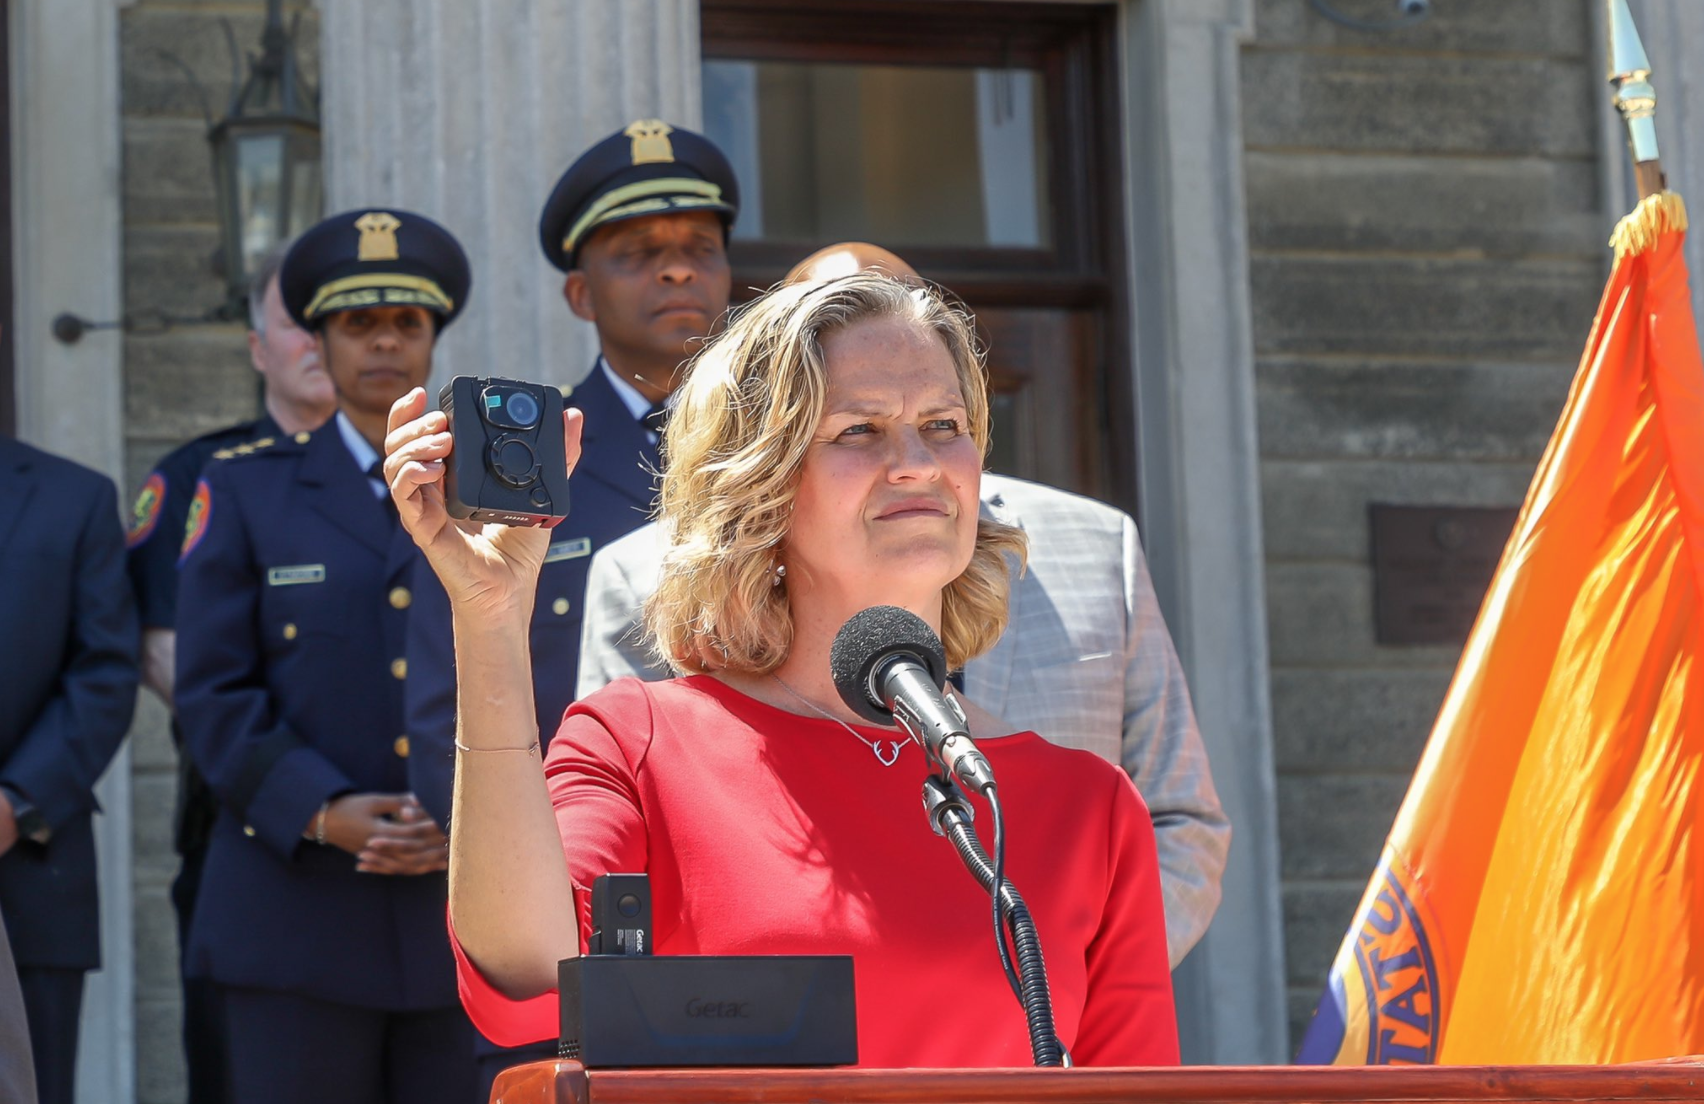 Nassau County Executive Laura Curran announced the purchase of body cameras for the county's police department on Thursday. (Photo courtesy of the county executive's office)